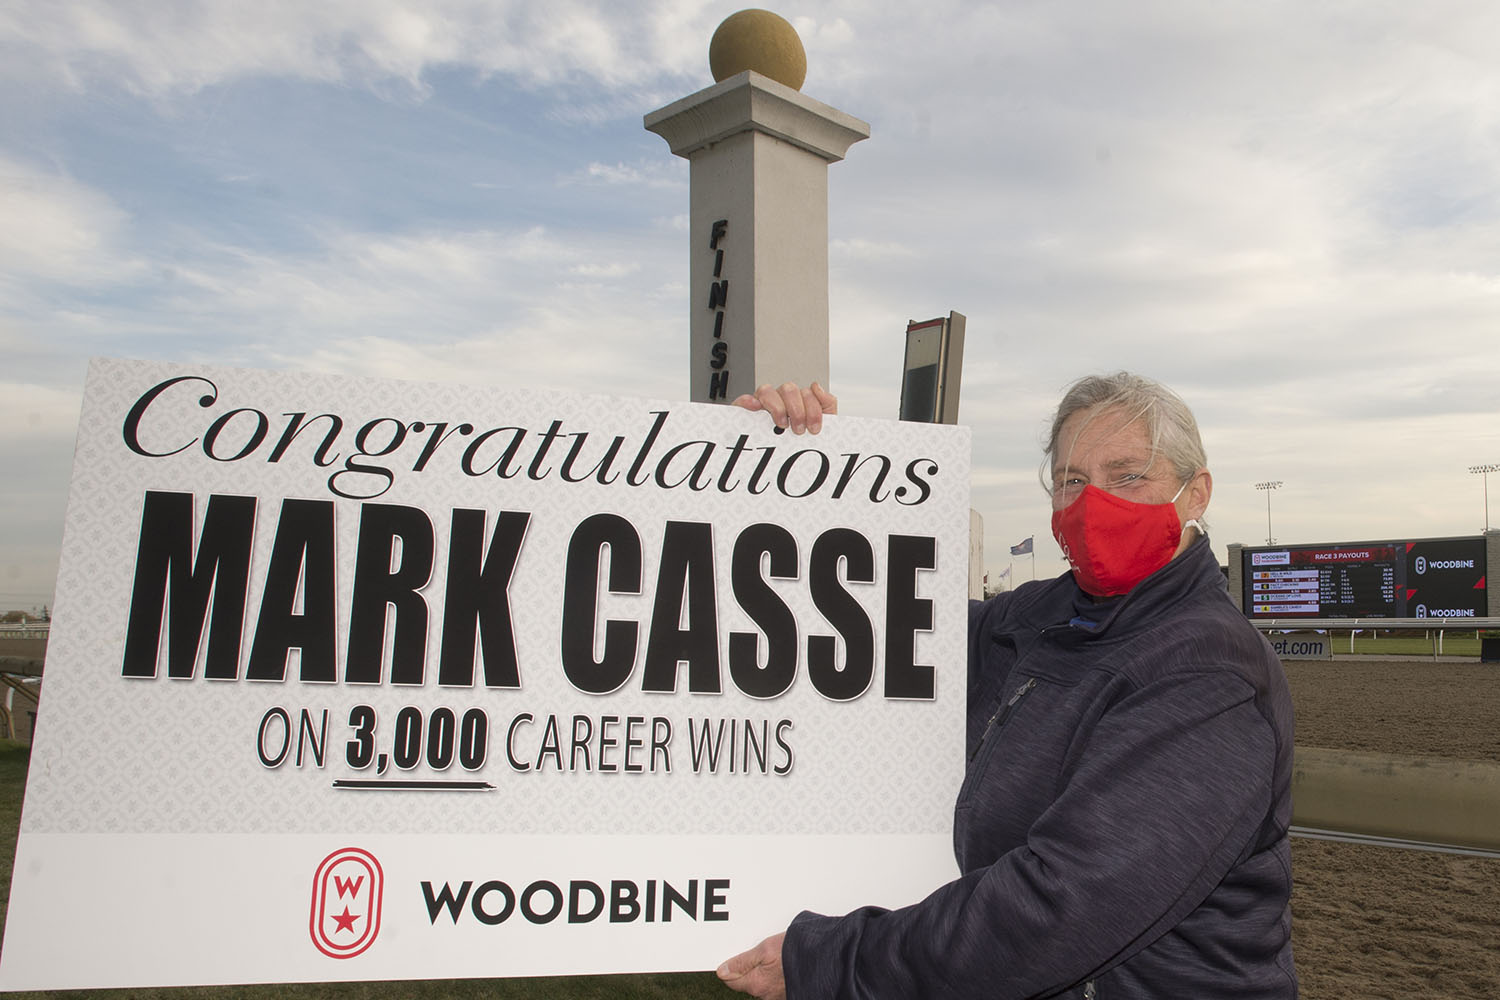 Mark Casse: The story behind 3,000